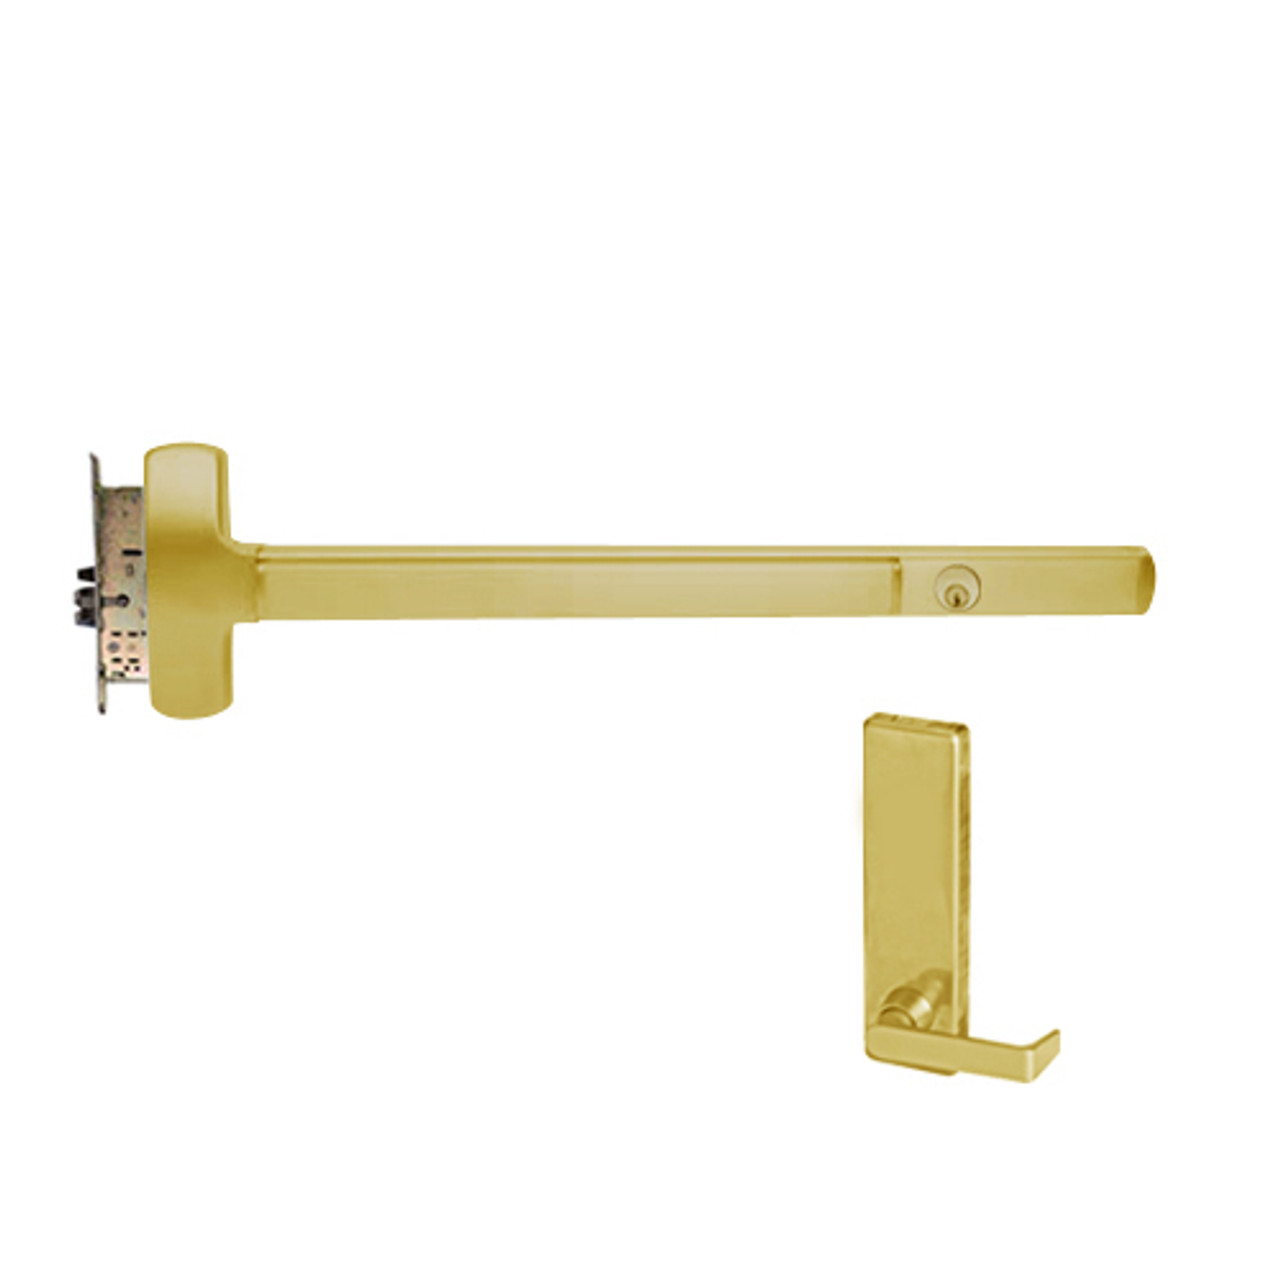 CD25-M-L-DT-DANE-US3-3-LHR Falcon Exit Device in Polished Brass